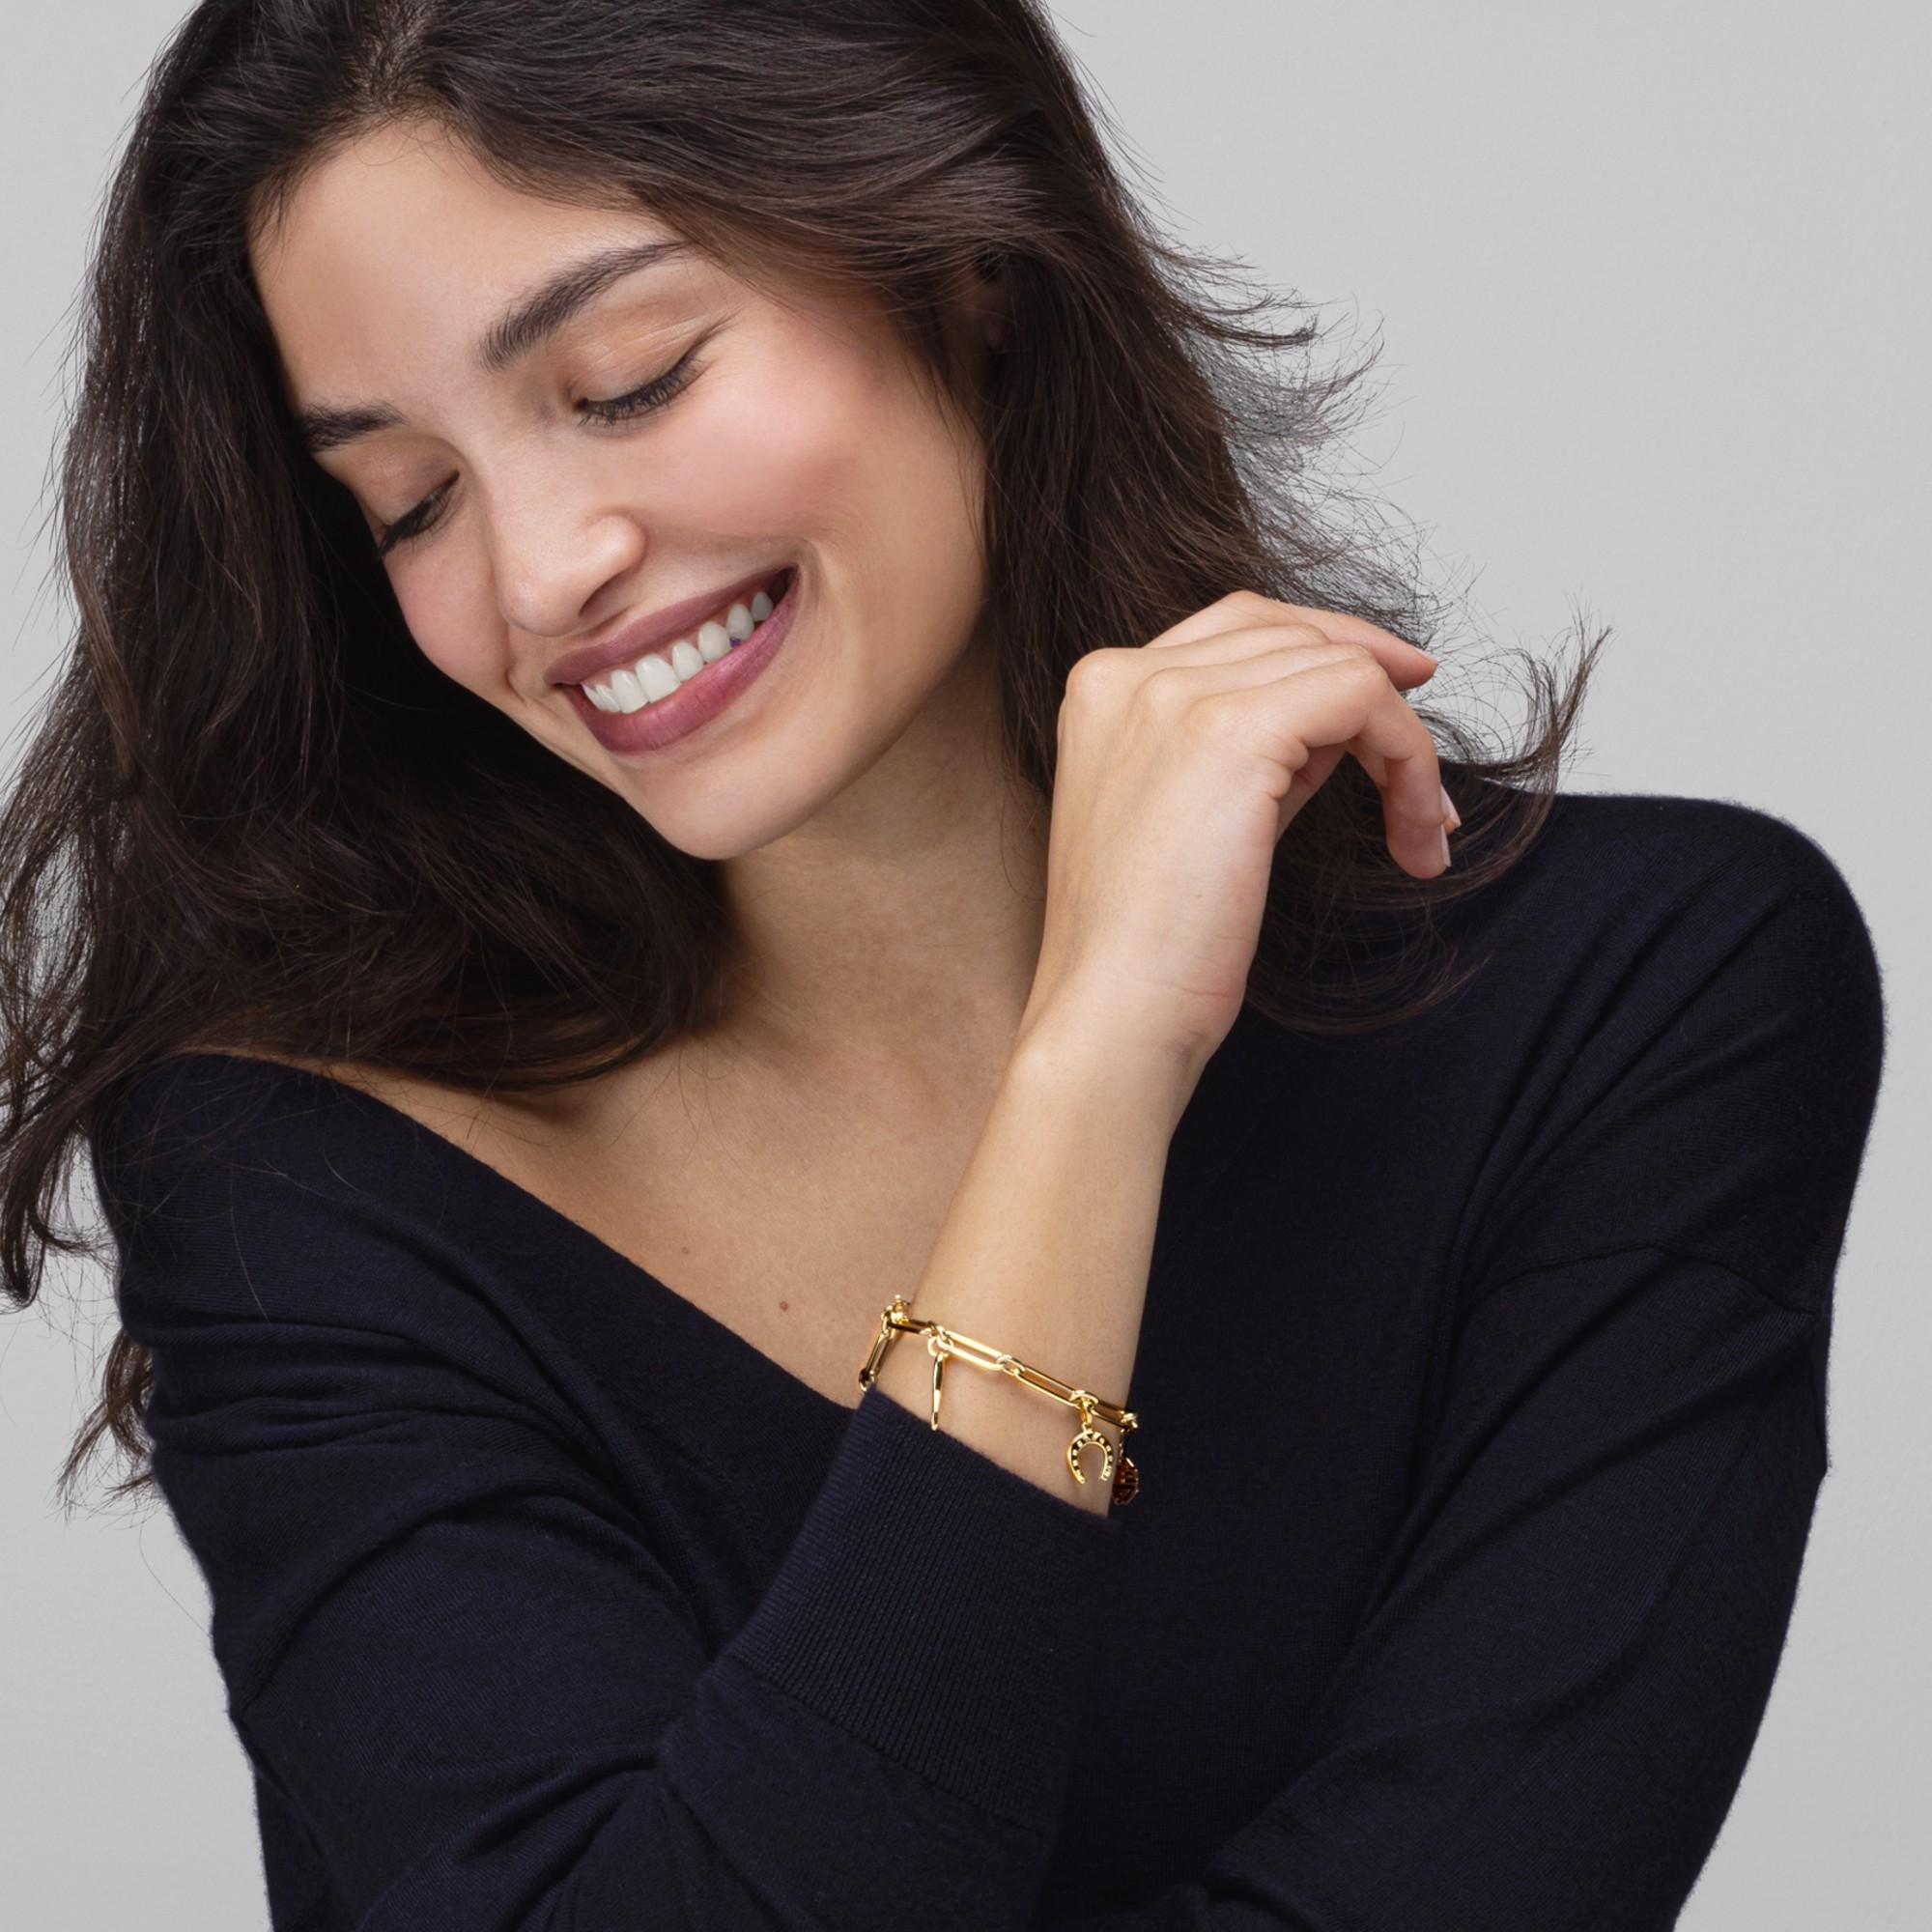 Alex Jona design collection, hand crafted in Italy, 18 karat yellow gold luck charm bracelet.

Alex Jona jewels stand out, not only for their special design and for the excellent quality of the gemstones, but also for the careful attention given to